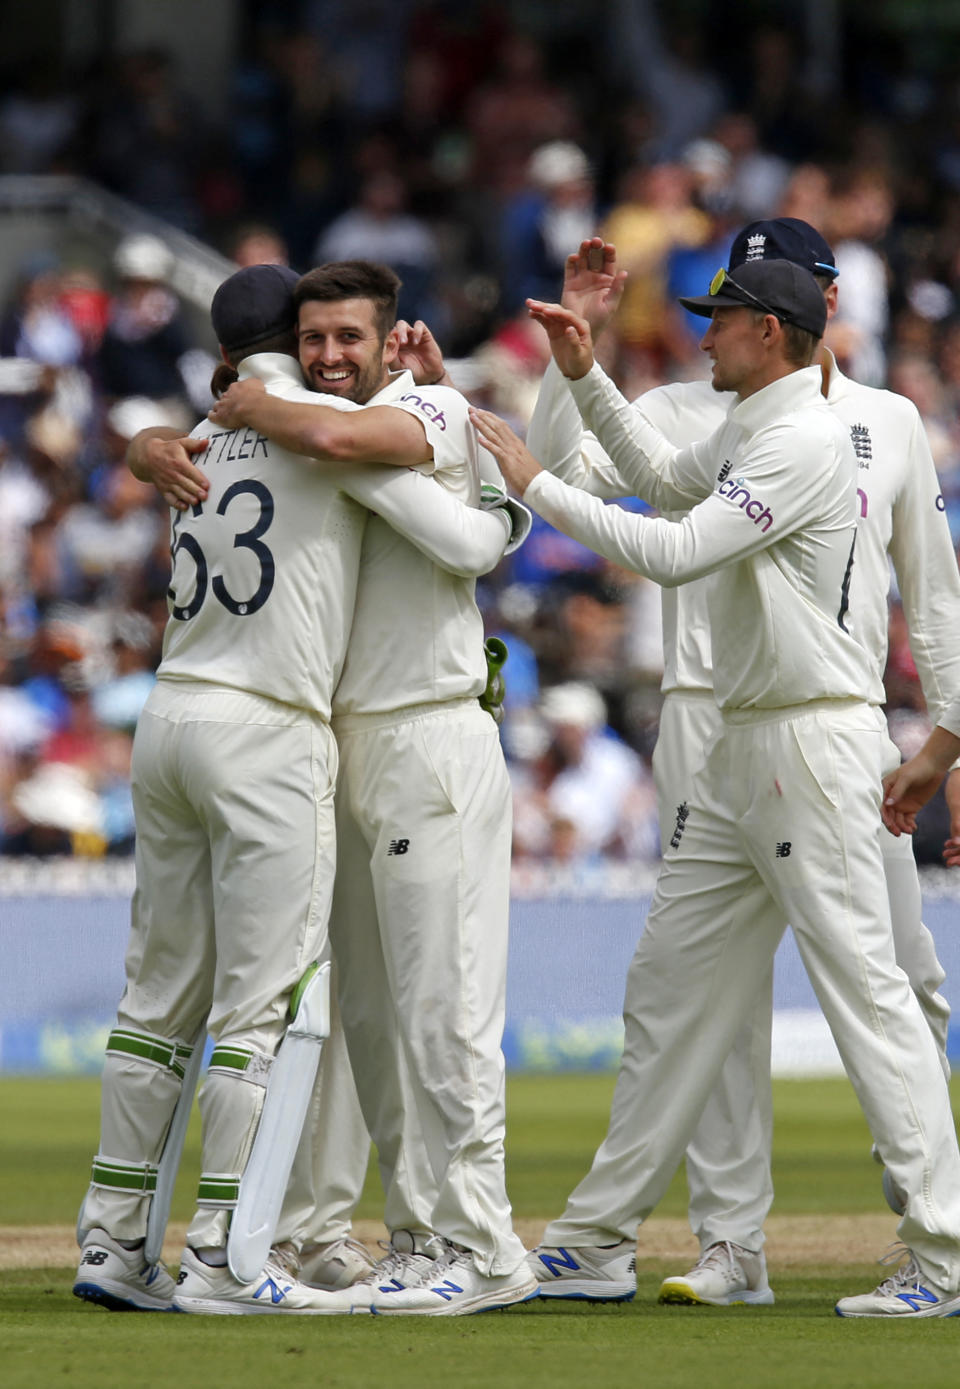 England's Mark Wood (2nd L) celebrates with teammates after taking the wicket of India's KL Rahul for 5 runs on the fourth day of the second cricket Test match  between England and India at Lord's cricket ground in London on August 15, 2021. (Photo by IAN KINGTON/AFP via Getty Images)